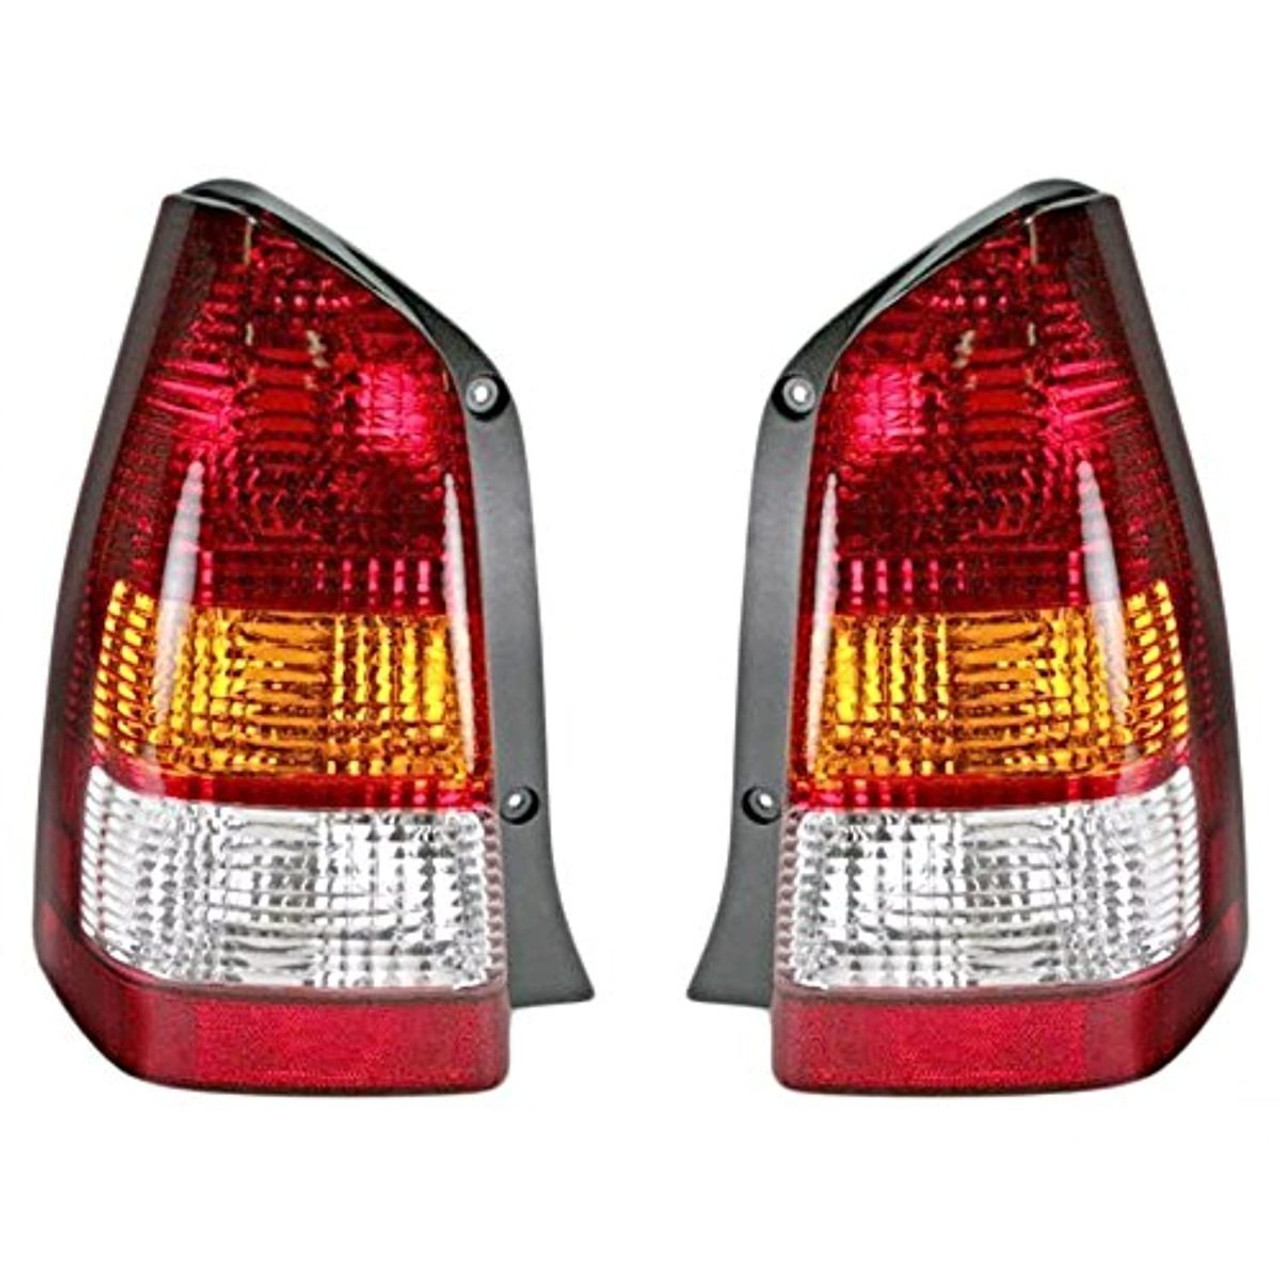 Fits 01-04 Tribute Left & Right Tail Lamps/Lights Assemblies - Set